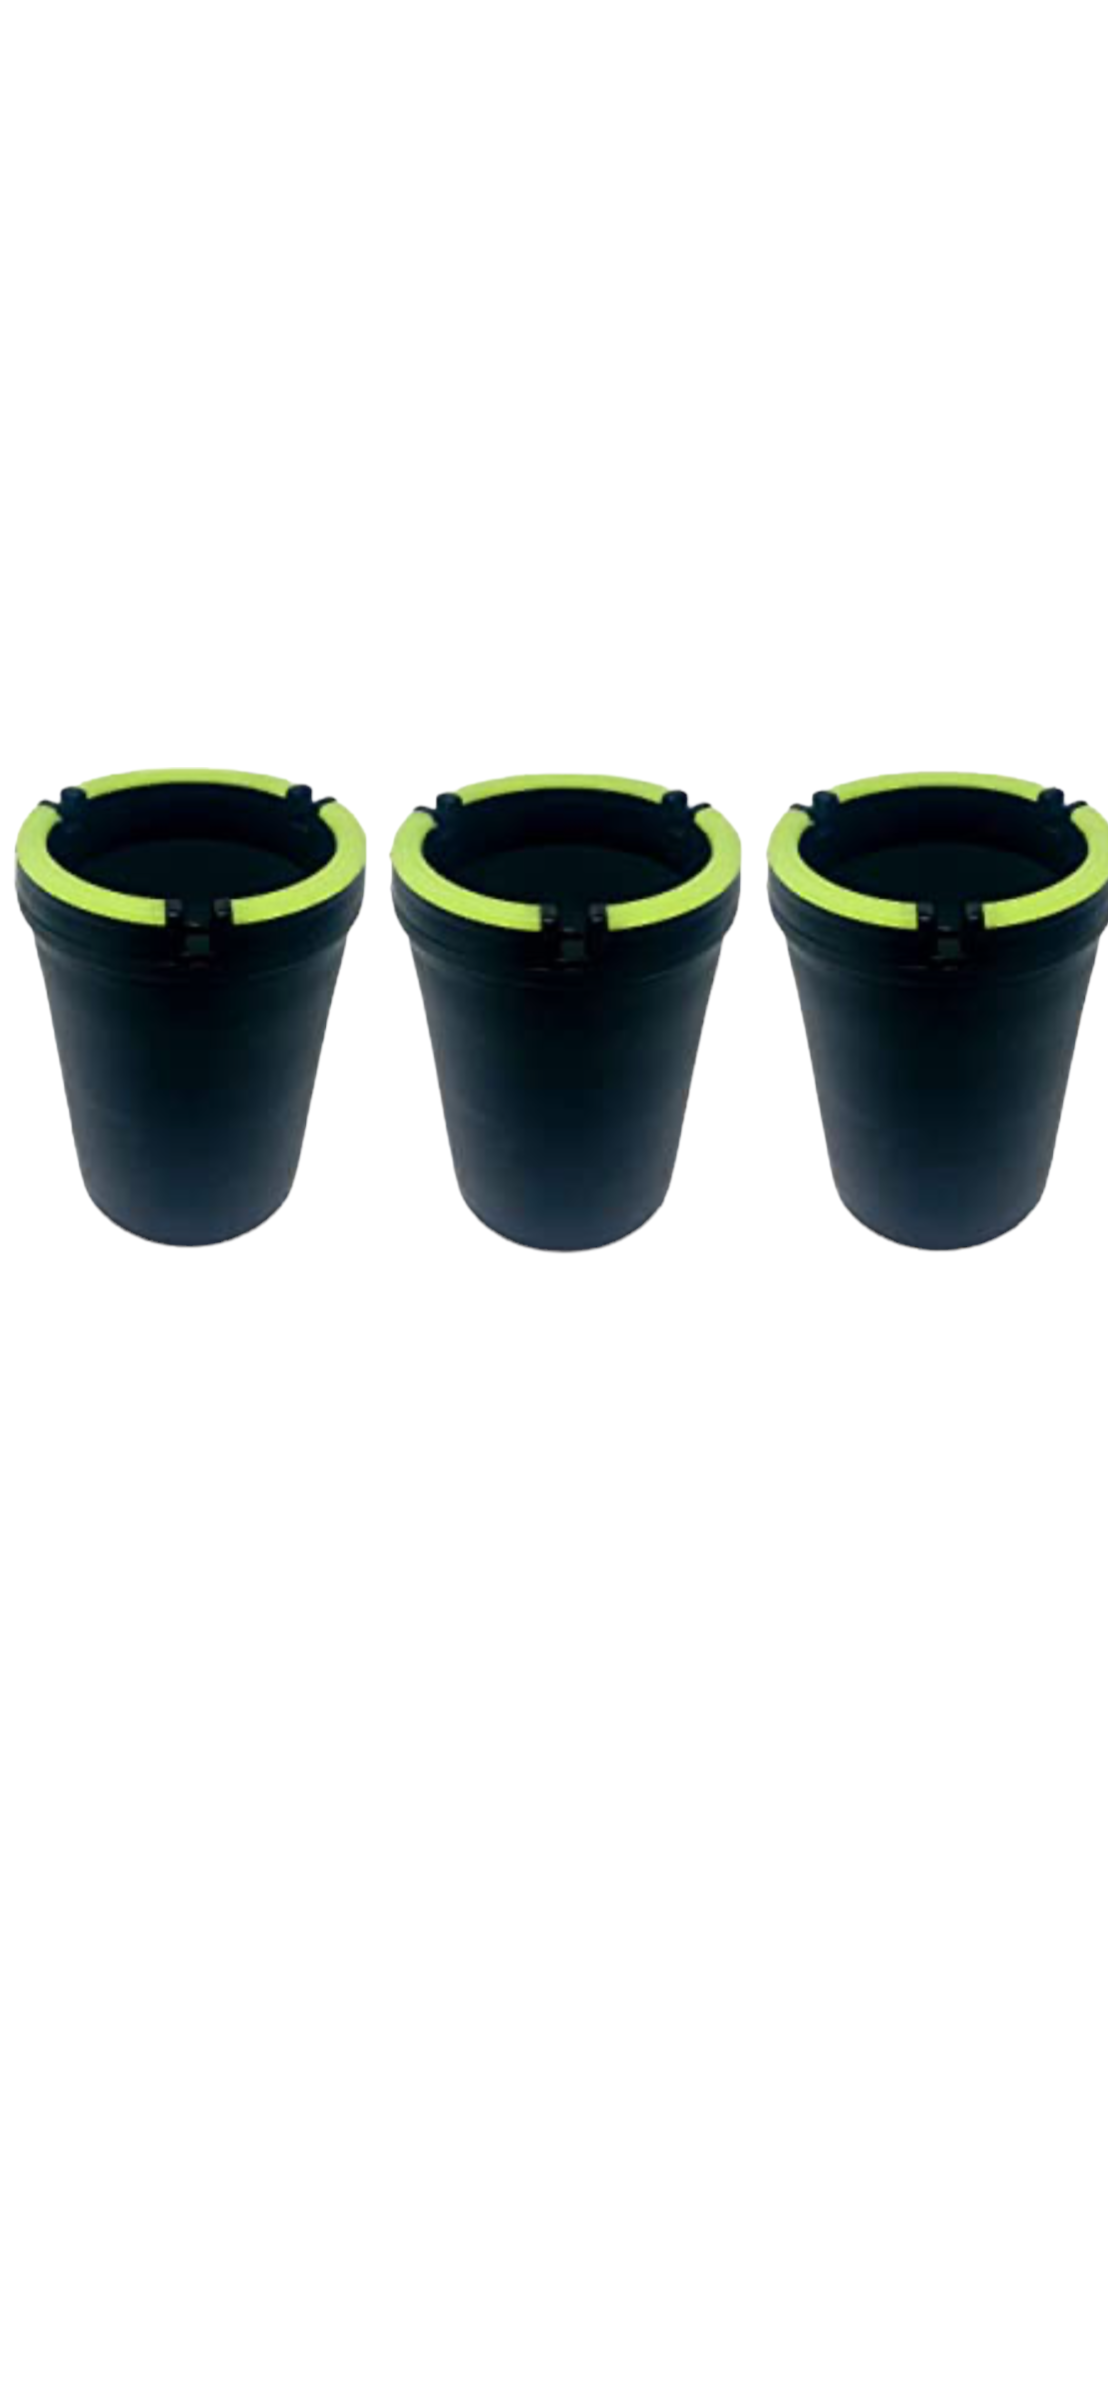 BUTT BUCKET ASHTRAY | GLOW IN THE DARK | 12 COUNT DISPLAY